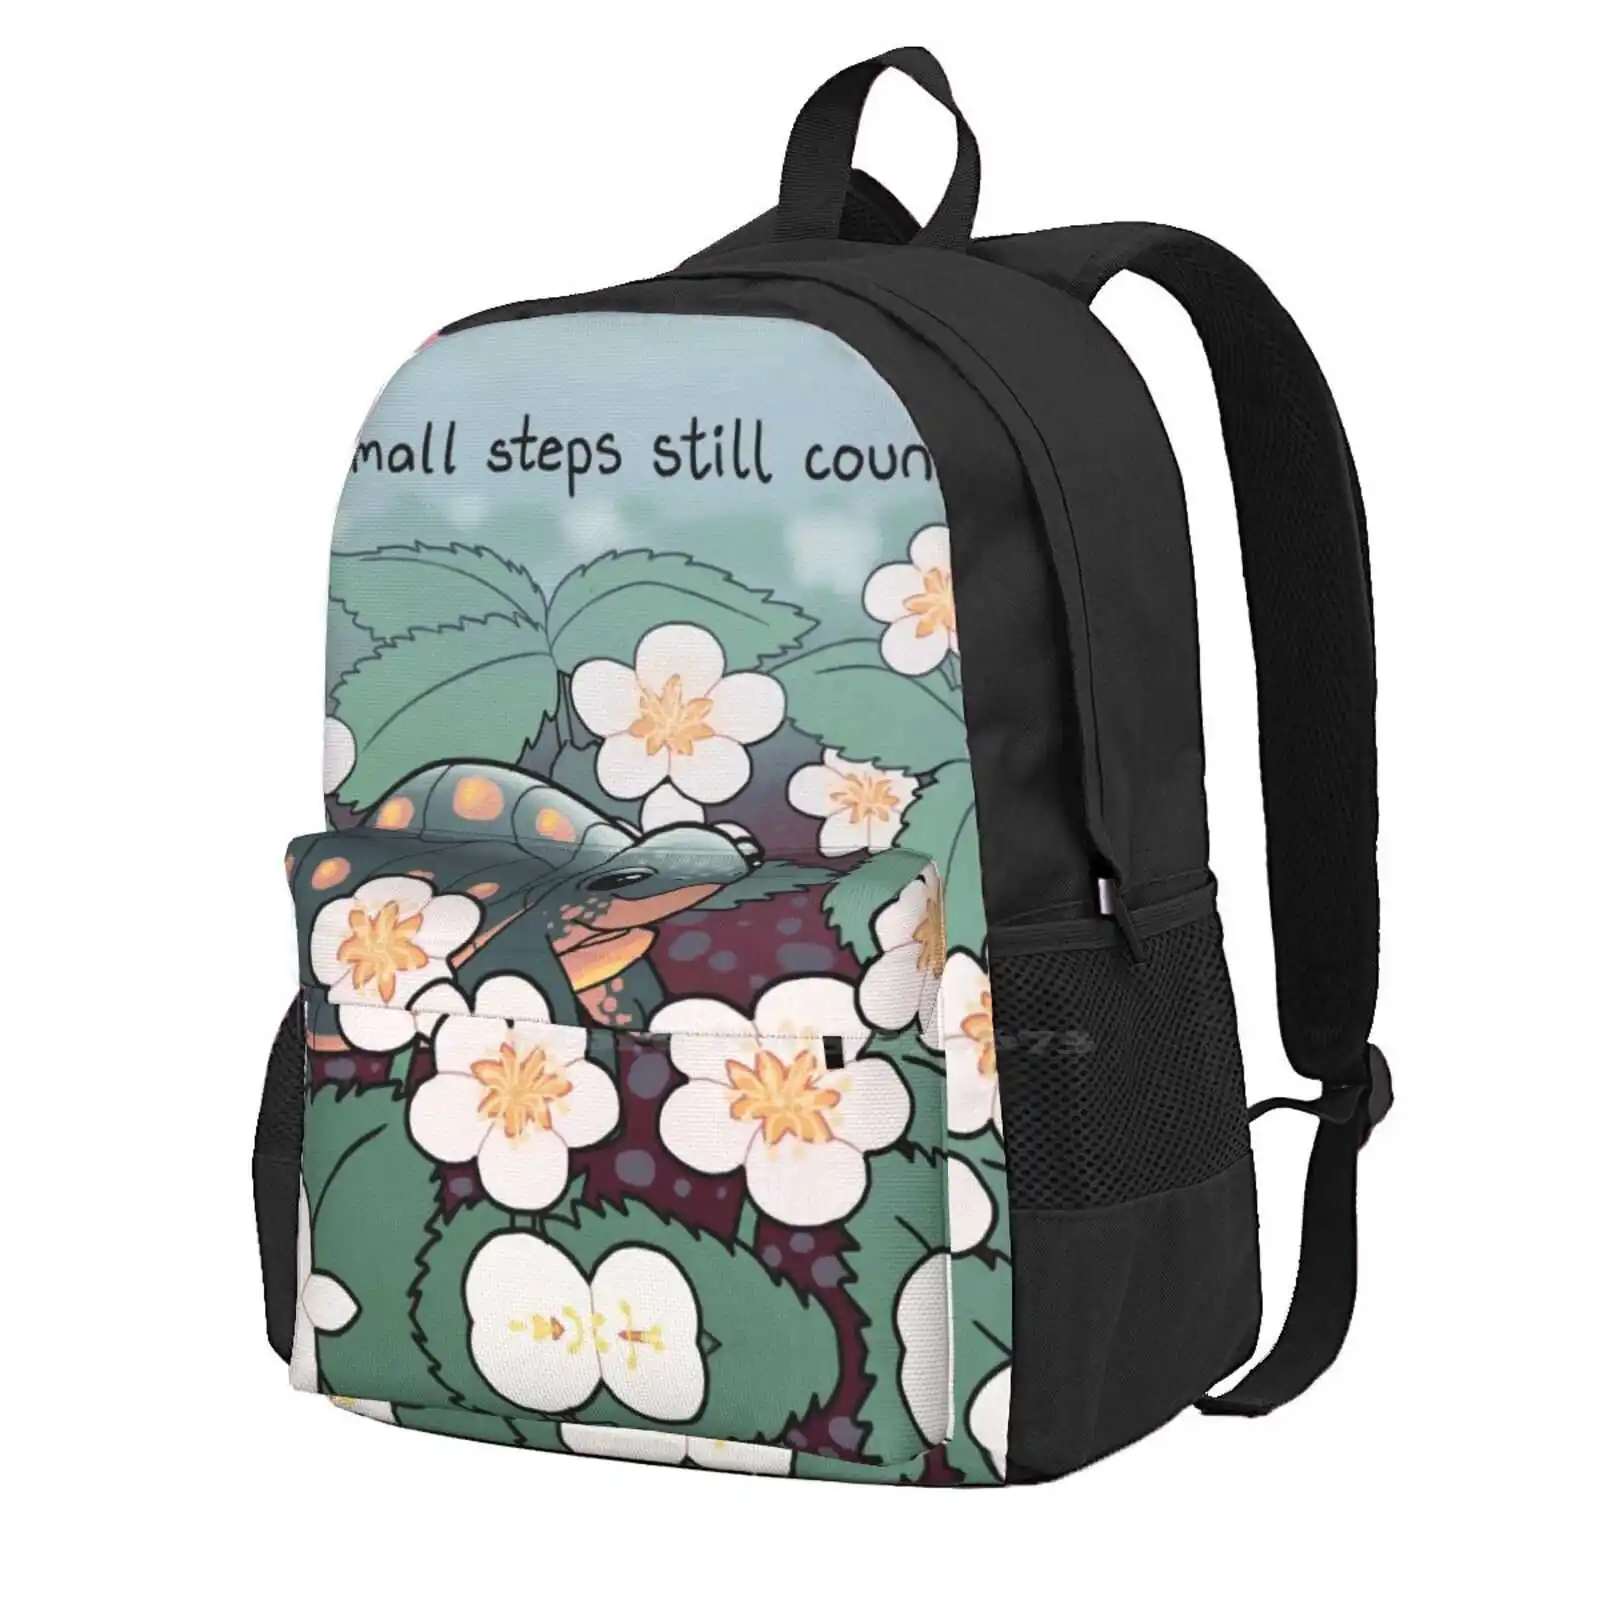 

" Small Steps Still Count " Baby Turtle In Strawberry Flowers New Arrivals Unisex Bags Student Bag Backpack Mental Health Self